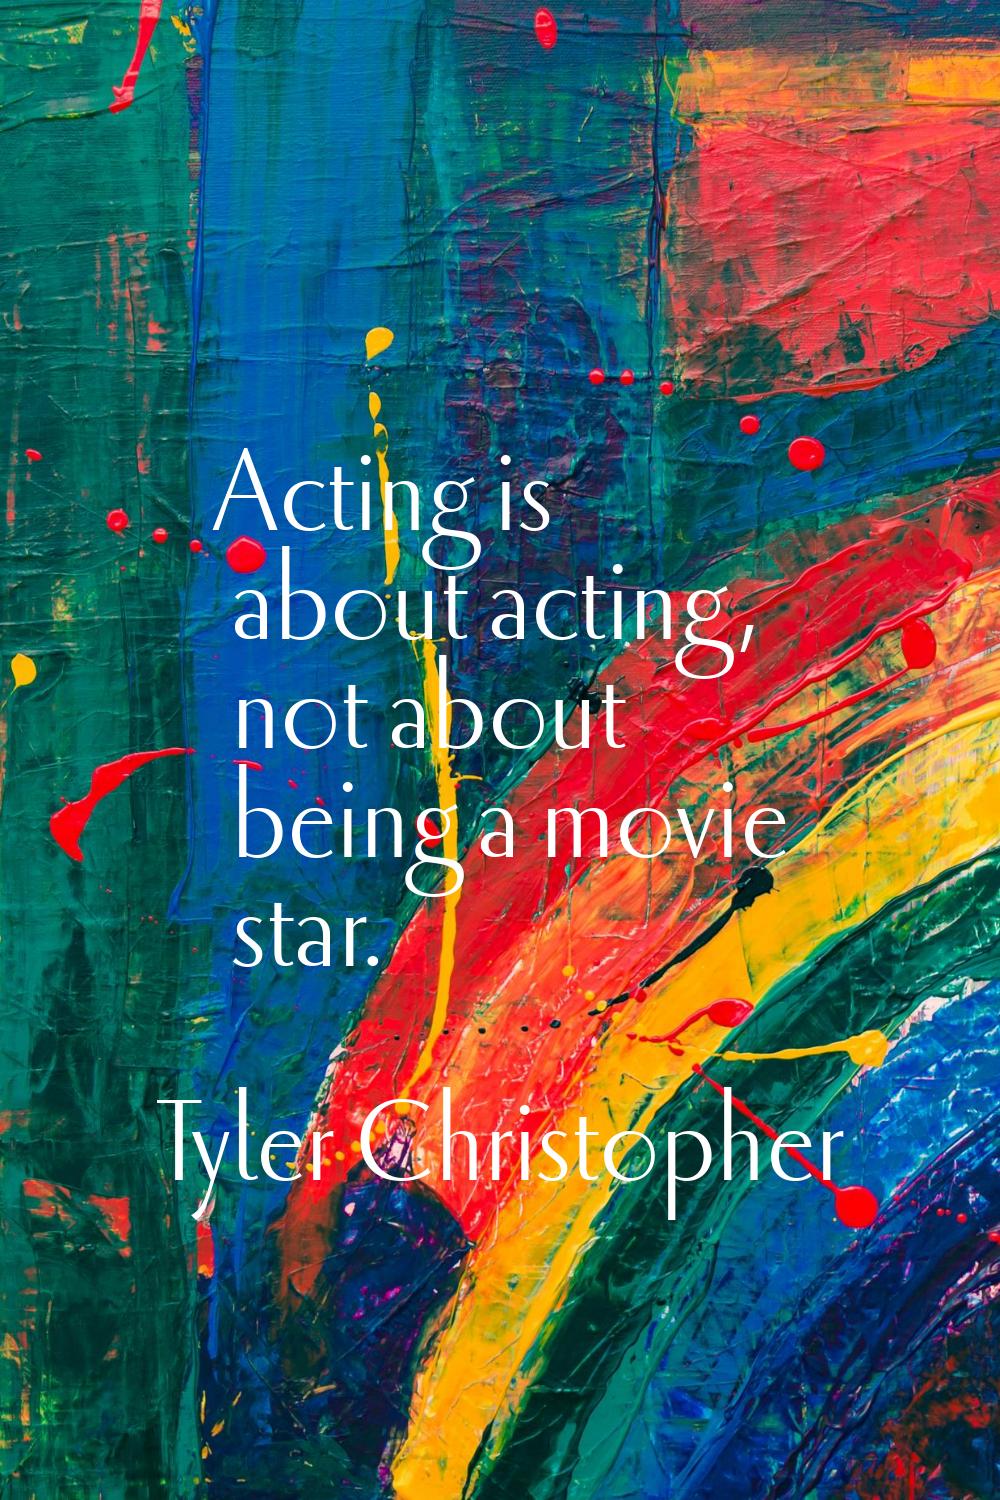 Acting is about acting, not about being a movie star.